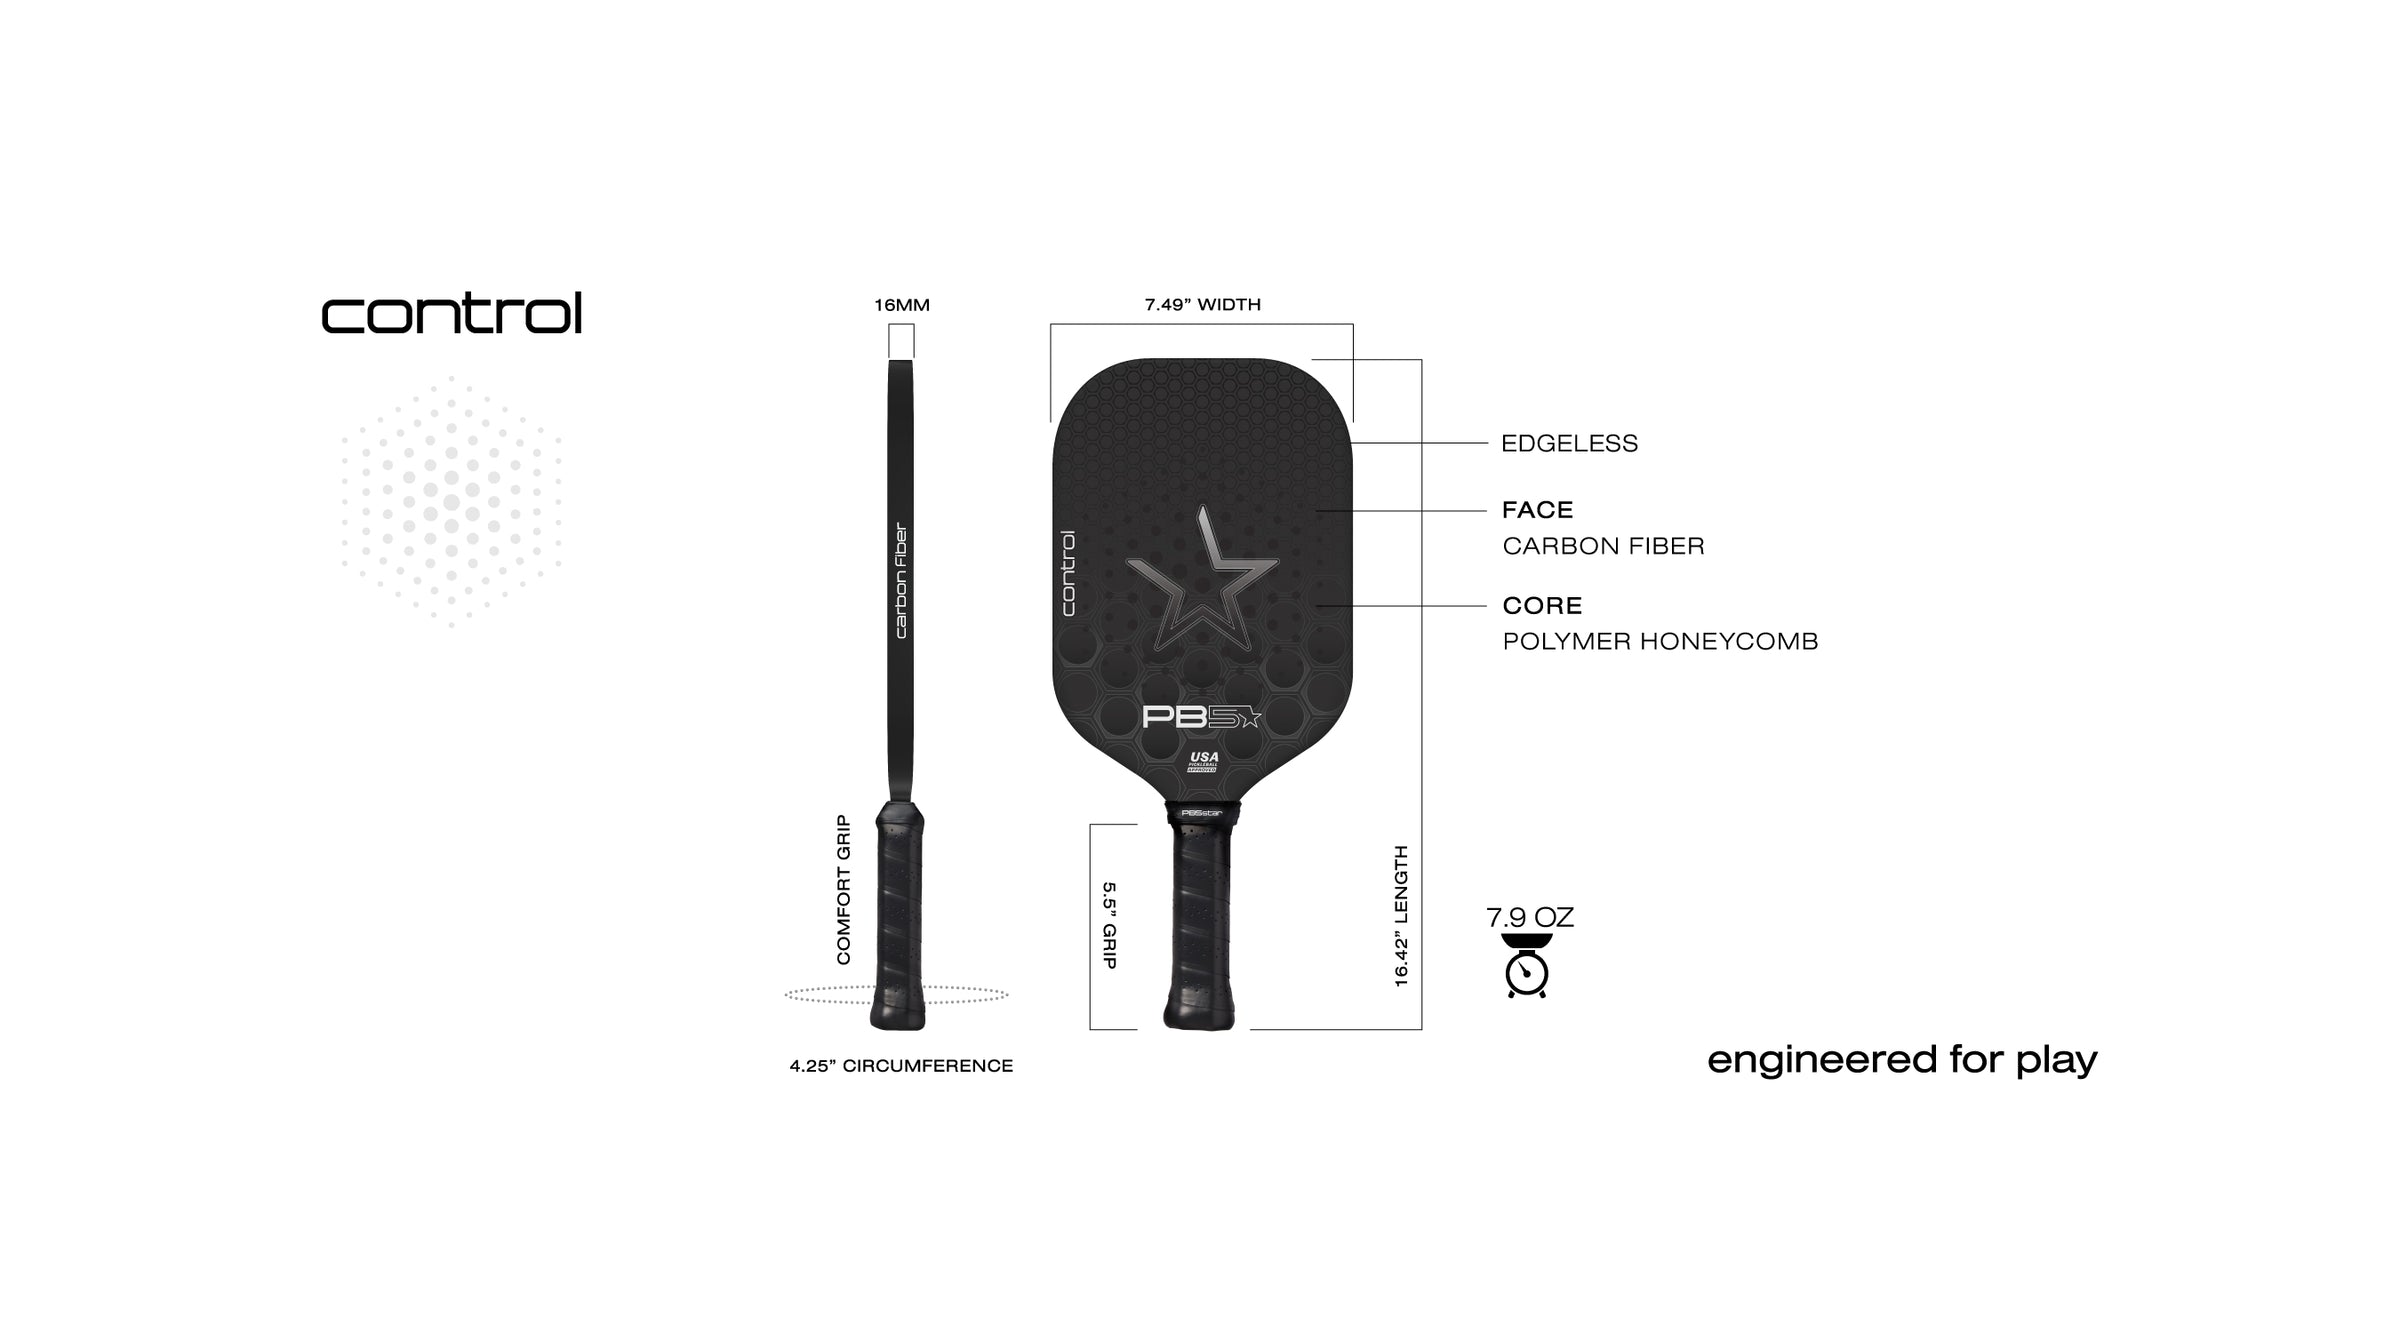 Control Paddle: comfort grip, edgeless, carbon fiber face, polymer honeycomb core, weight 7.9 oz. Engineered for play.